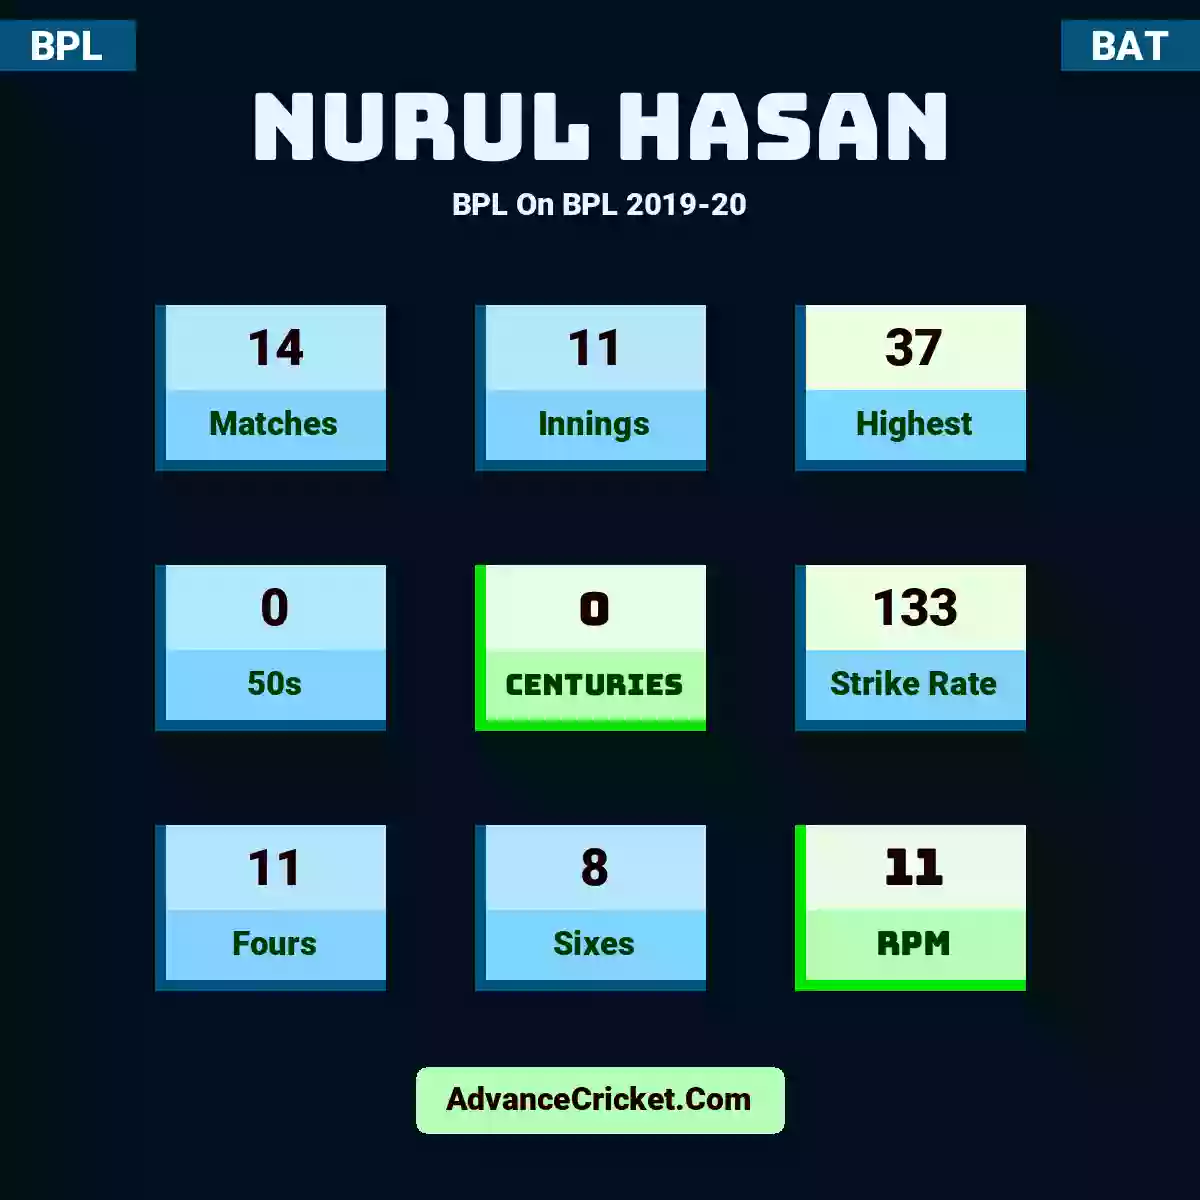 Nurul Hasan BPL  On BPL 2019-20, Nurul Hasan played 14 matches, scored 37 runs as highest, 0 half-centuries, and 0 centuries, with a strike rate of 133. N.Hasan hit 11 fours and 8 sixes, with an RPM of 11.